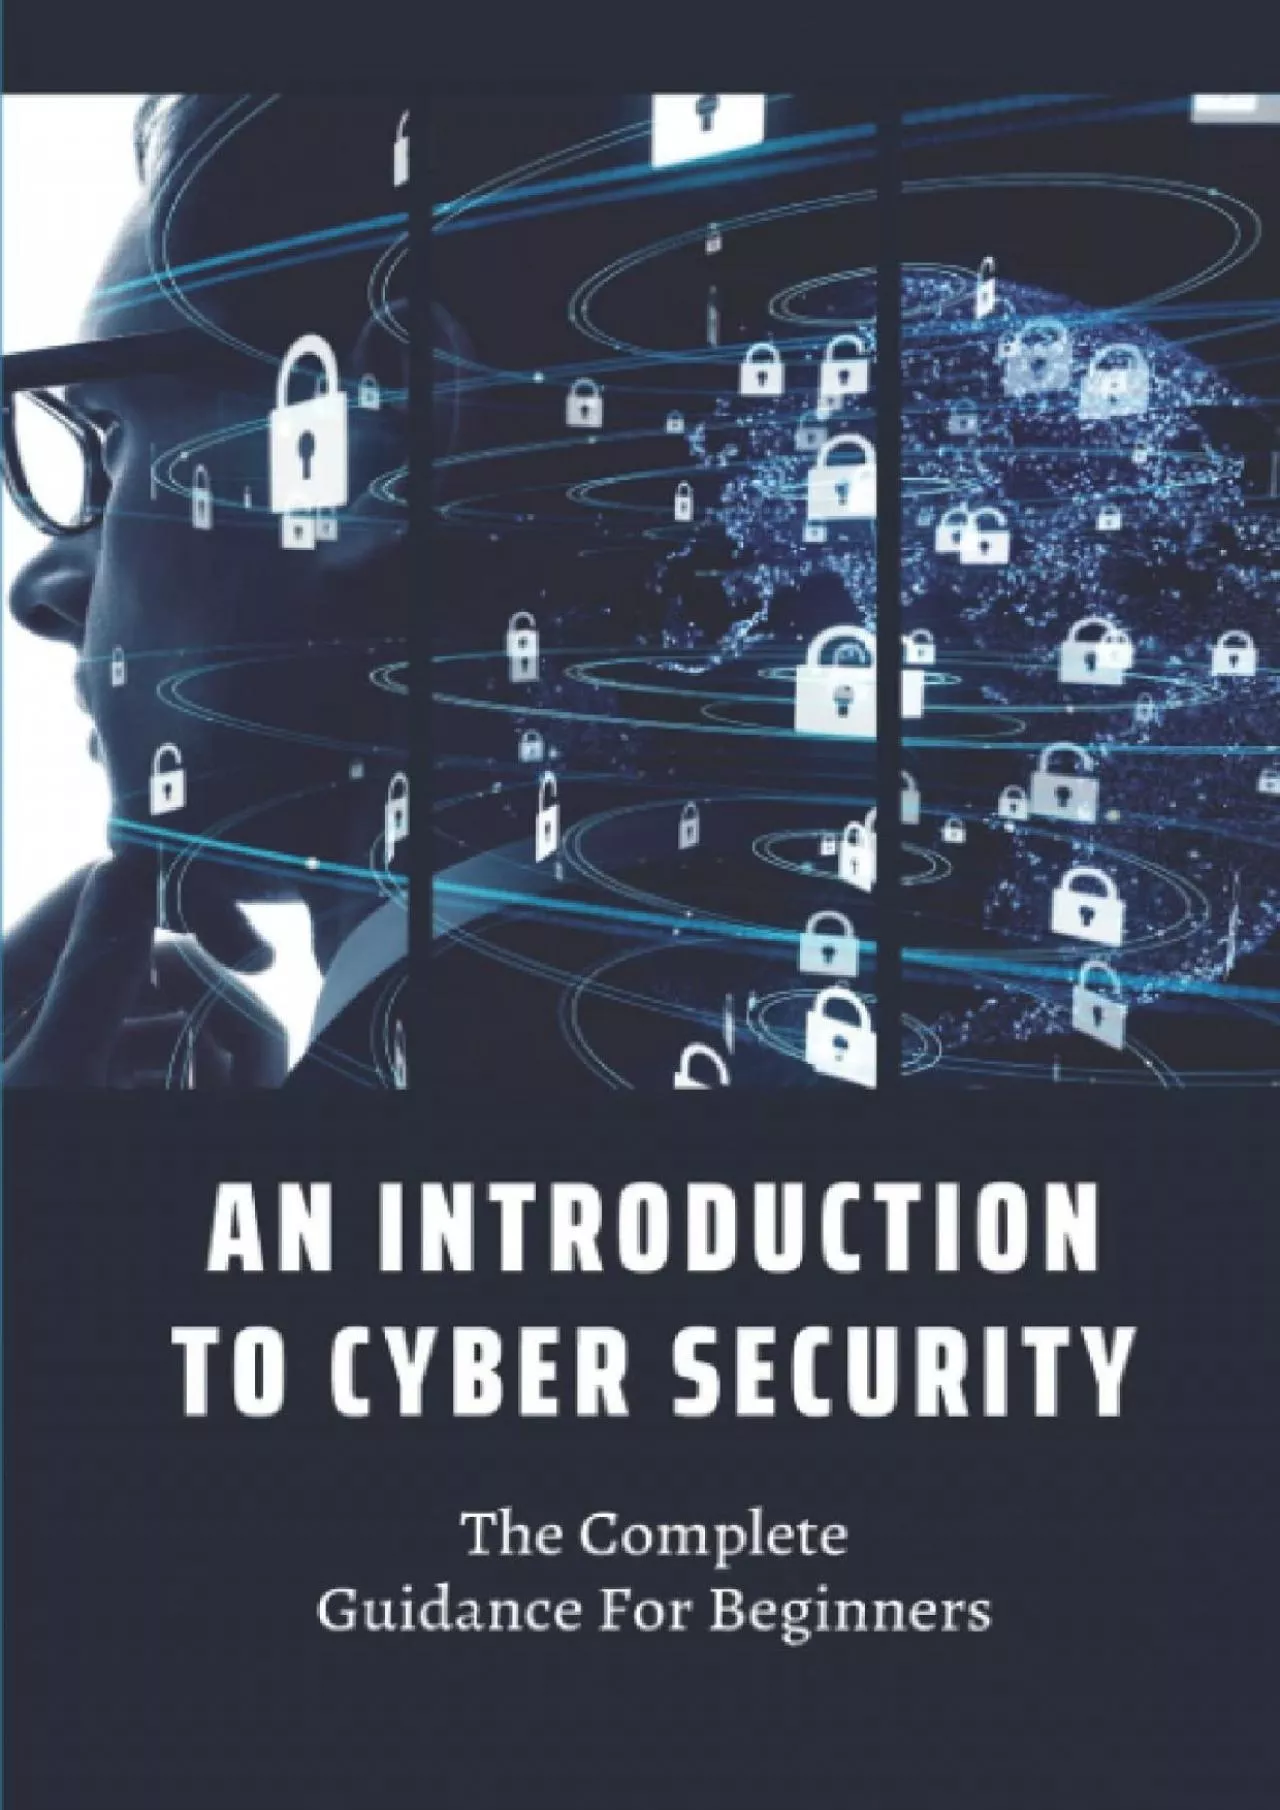 [eBOOK]-An Introduction To Cyber Security: The Complete Guidance For Beginners: Conclusion